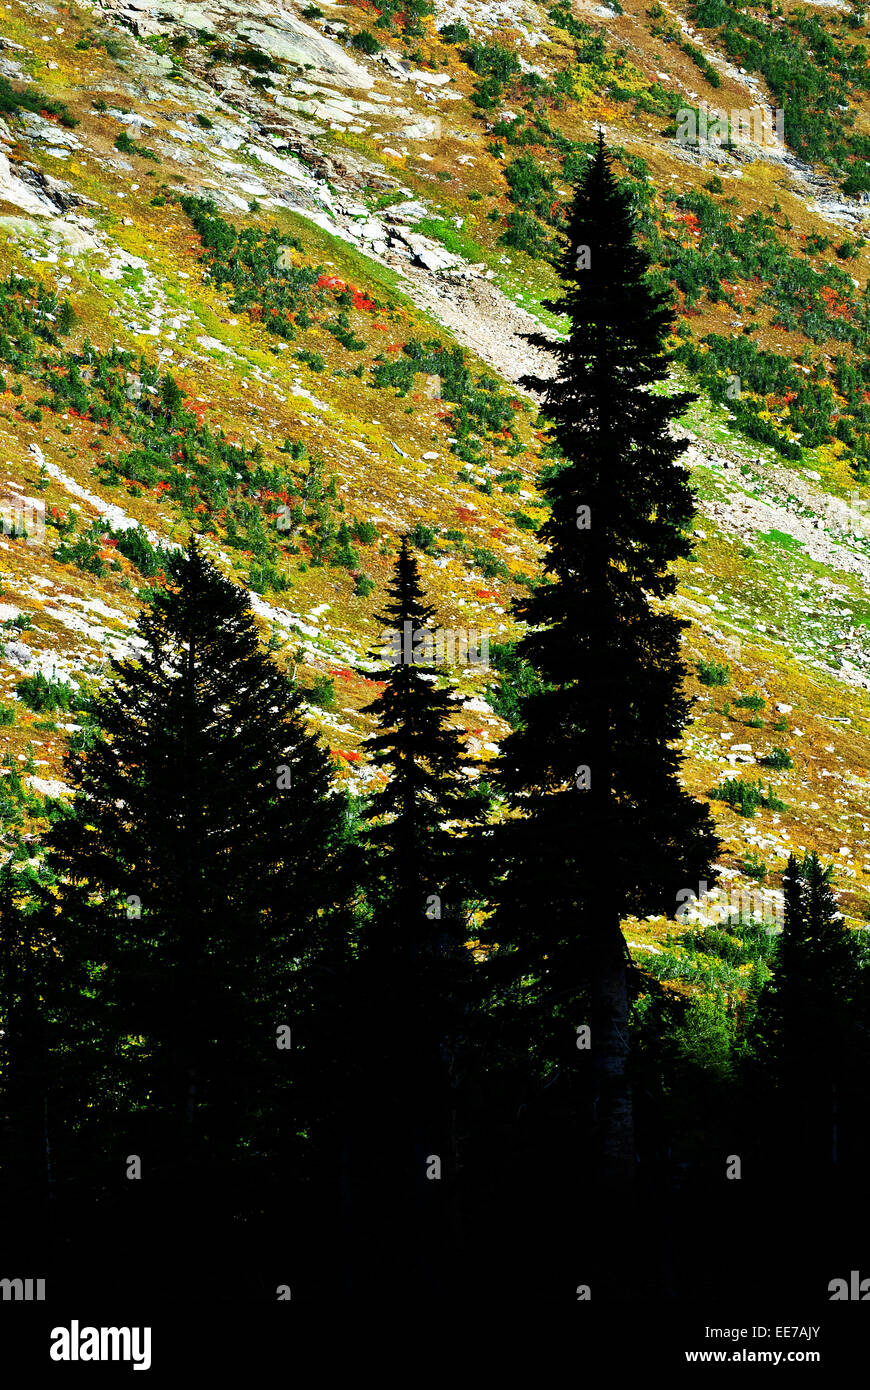 Detail of pine trees silhouetted against autumn mountainside Stock Photo